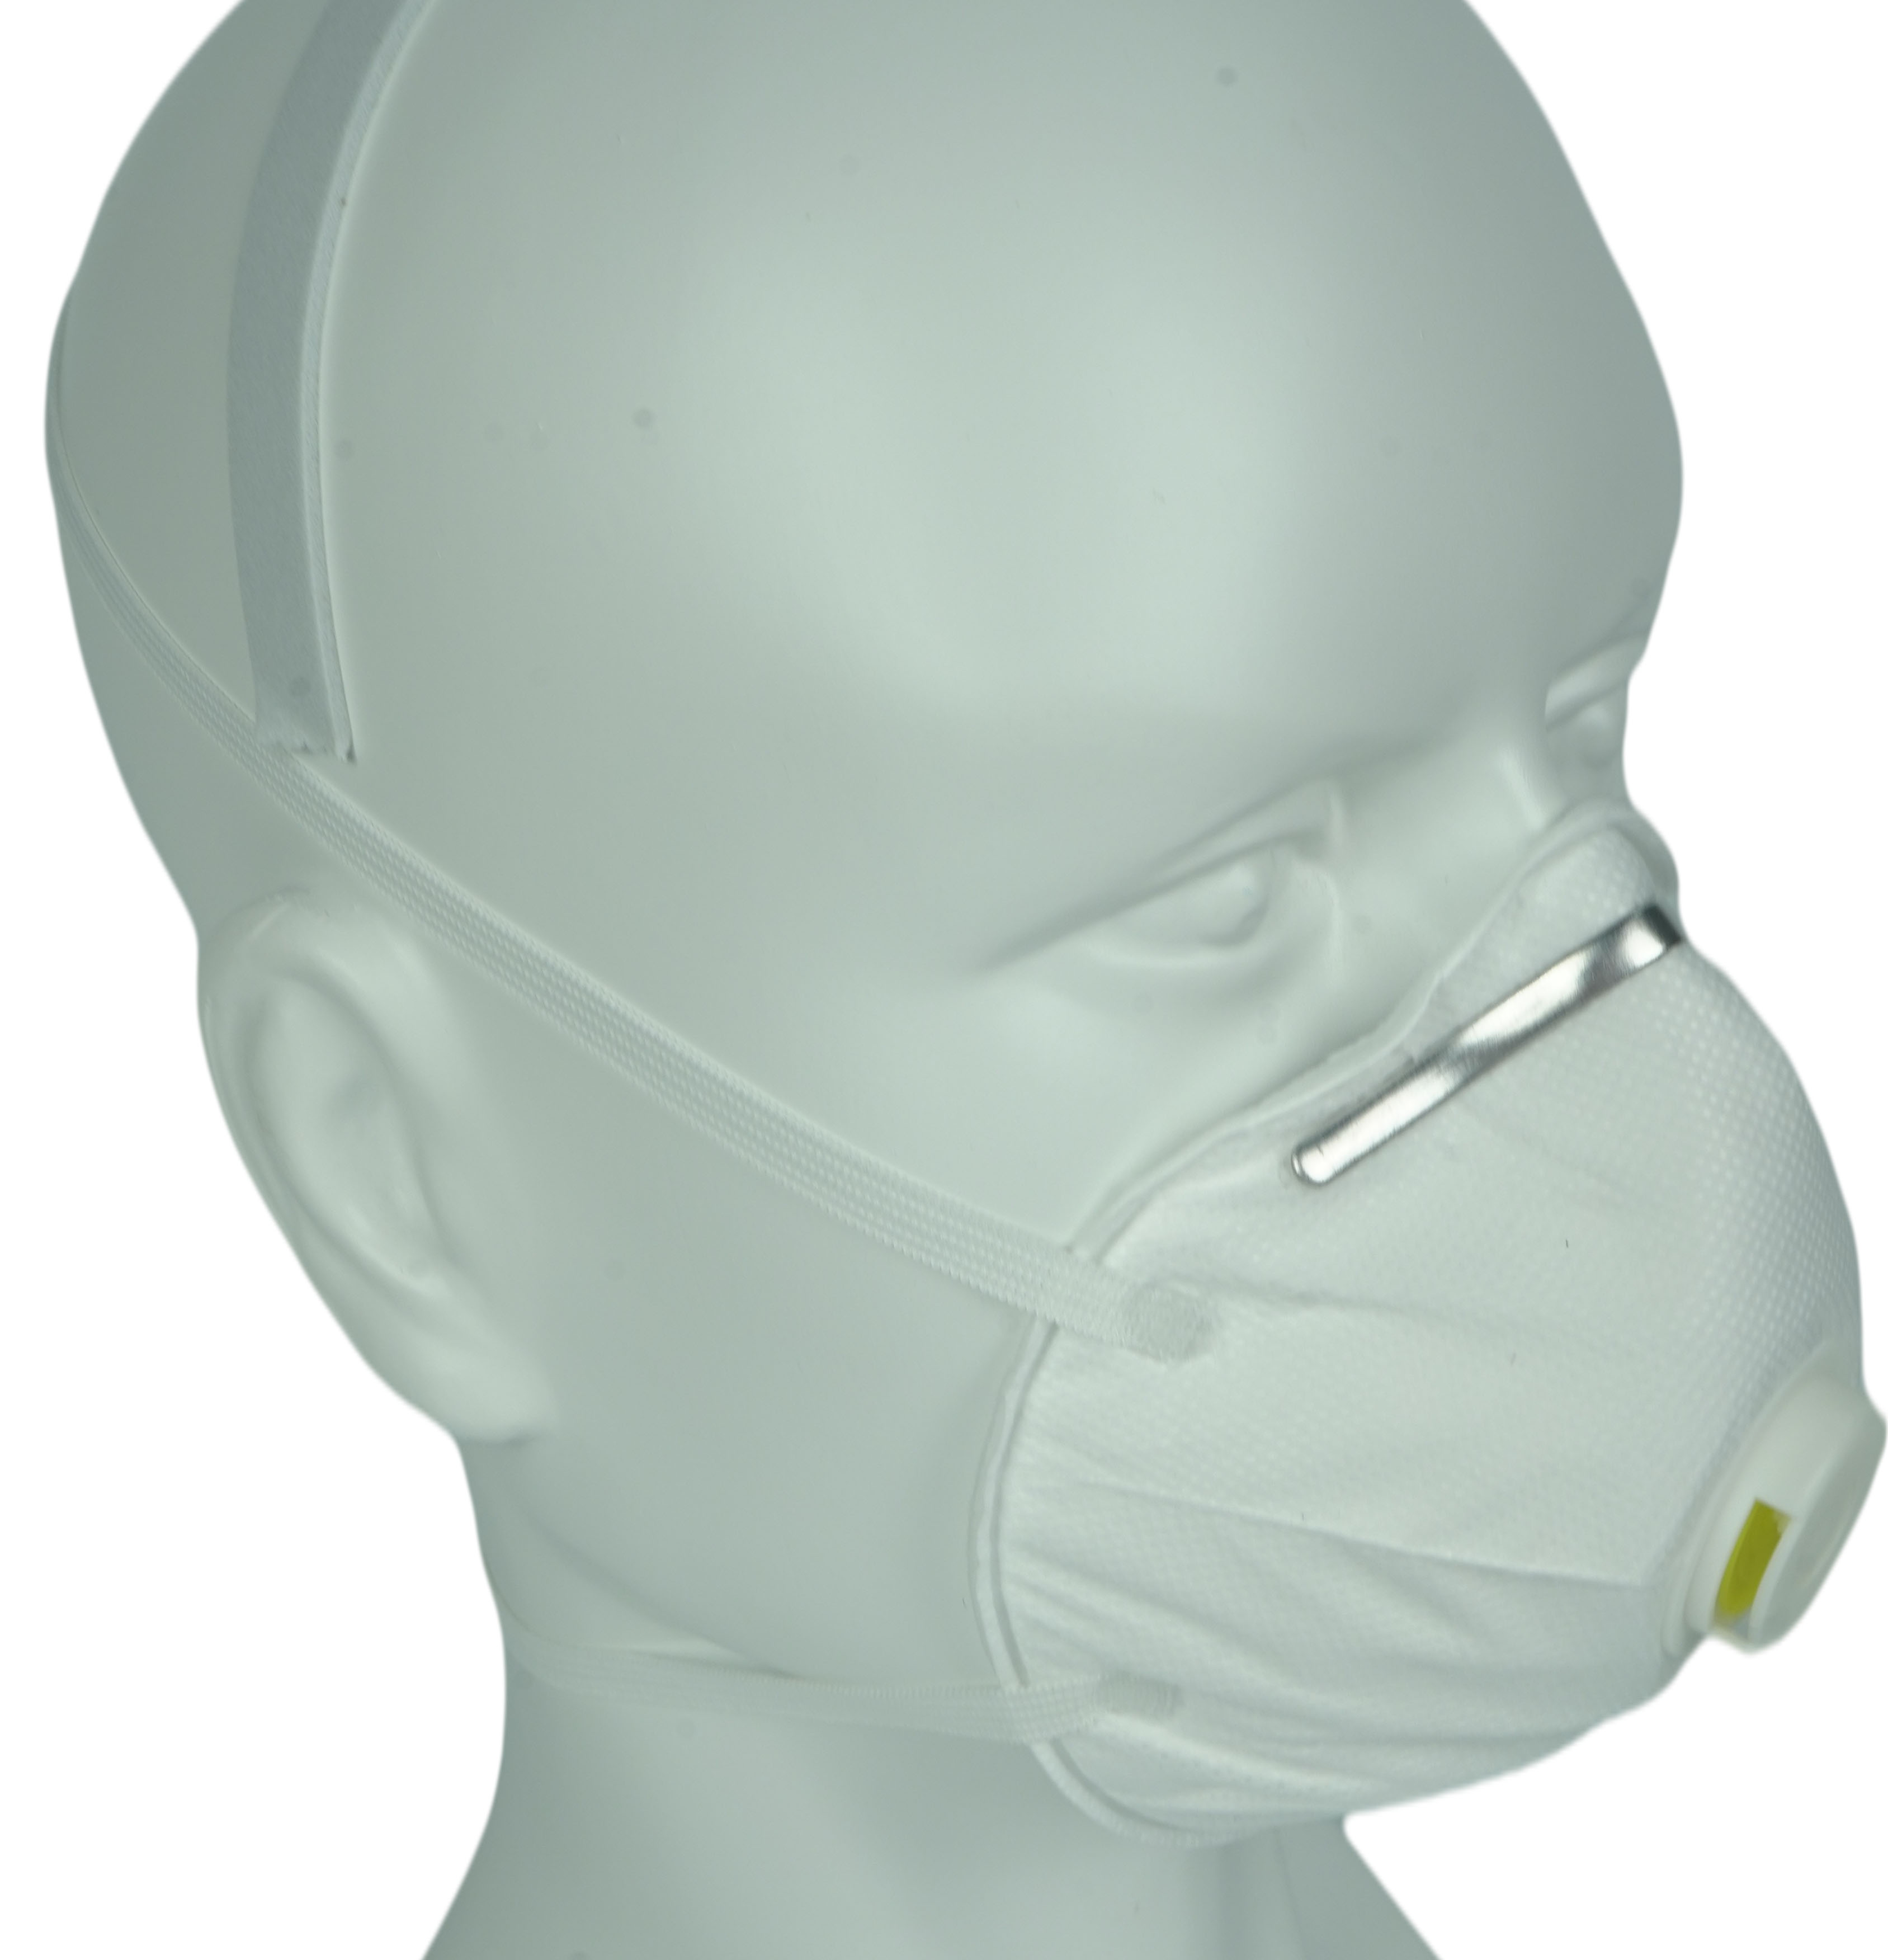 China Cup type non-medical protective mask with valve Manufacturers, Factory - Buy Cup type non-medical protective mask with valve at Good Price - Sengtor